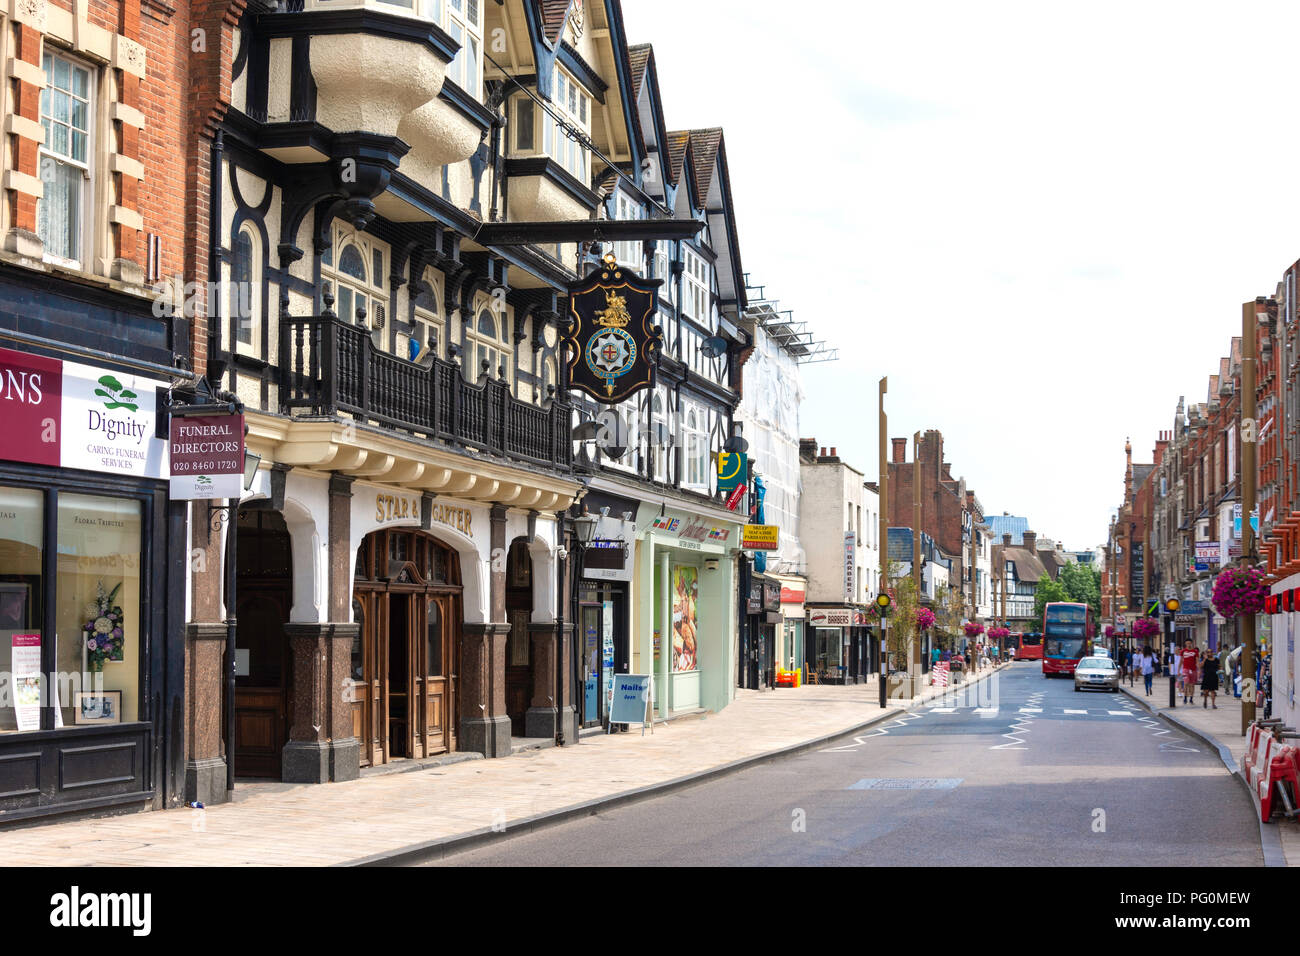 High Street, Bromley, London Borough of Bromley, Greater London, England, Regno Unito Foto Stock